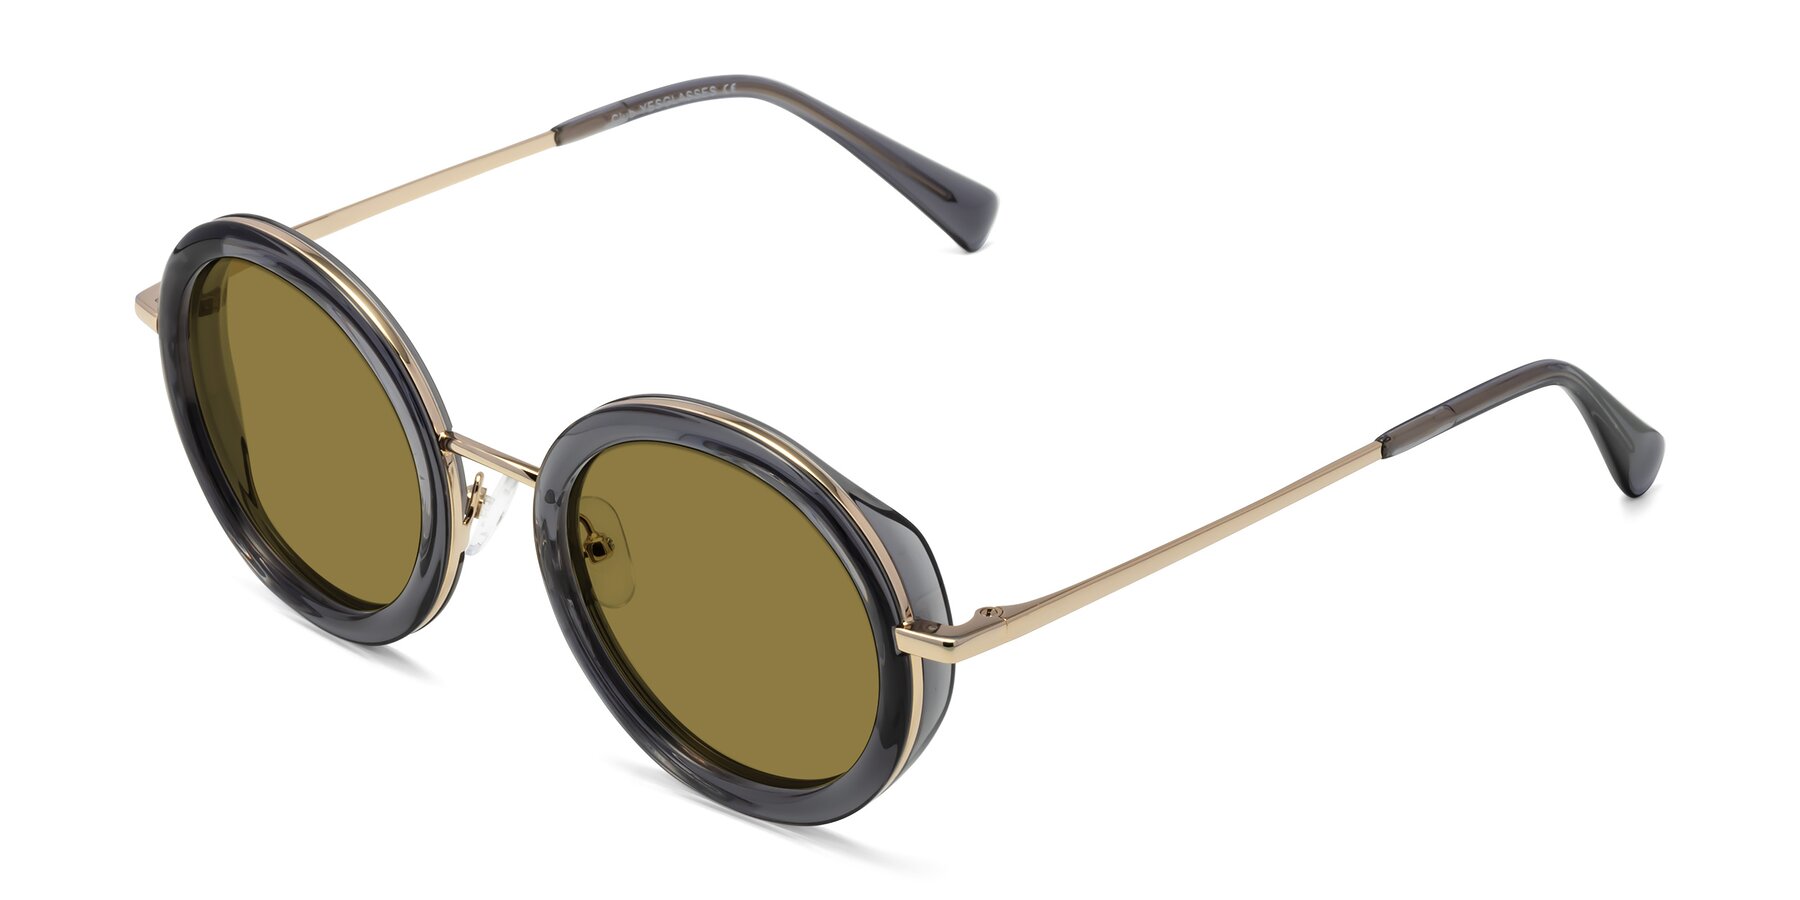 Angle of Club in Gray-Gold with Brown Polarized Lenses